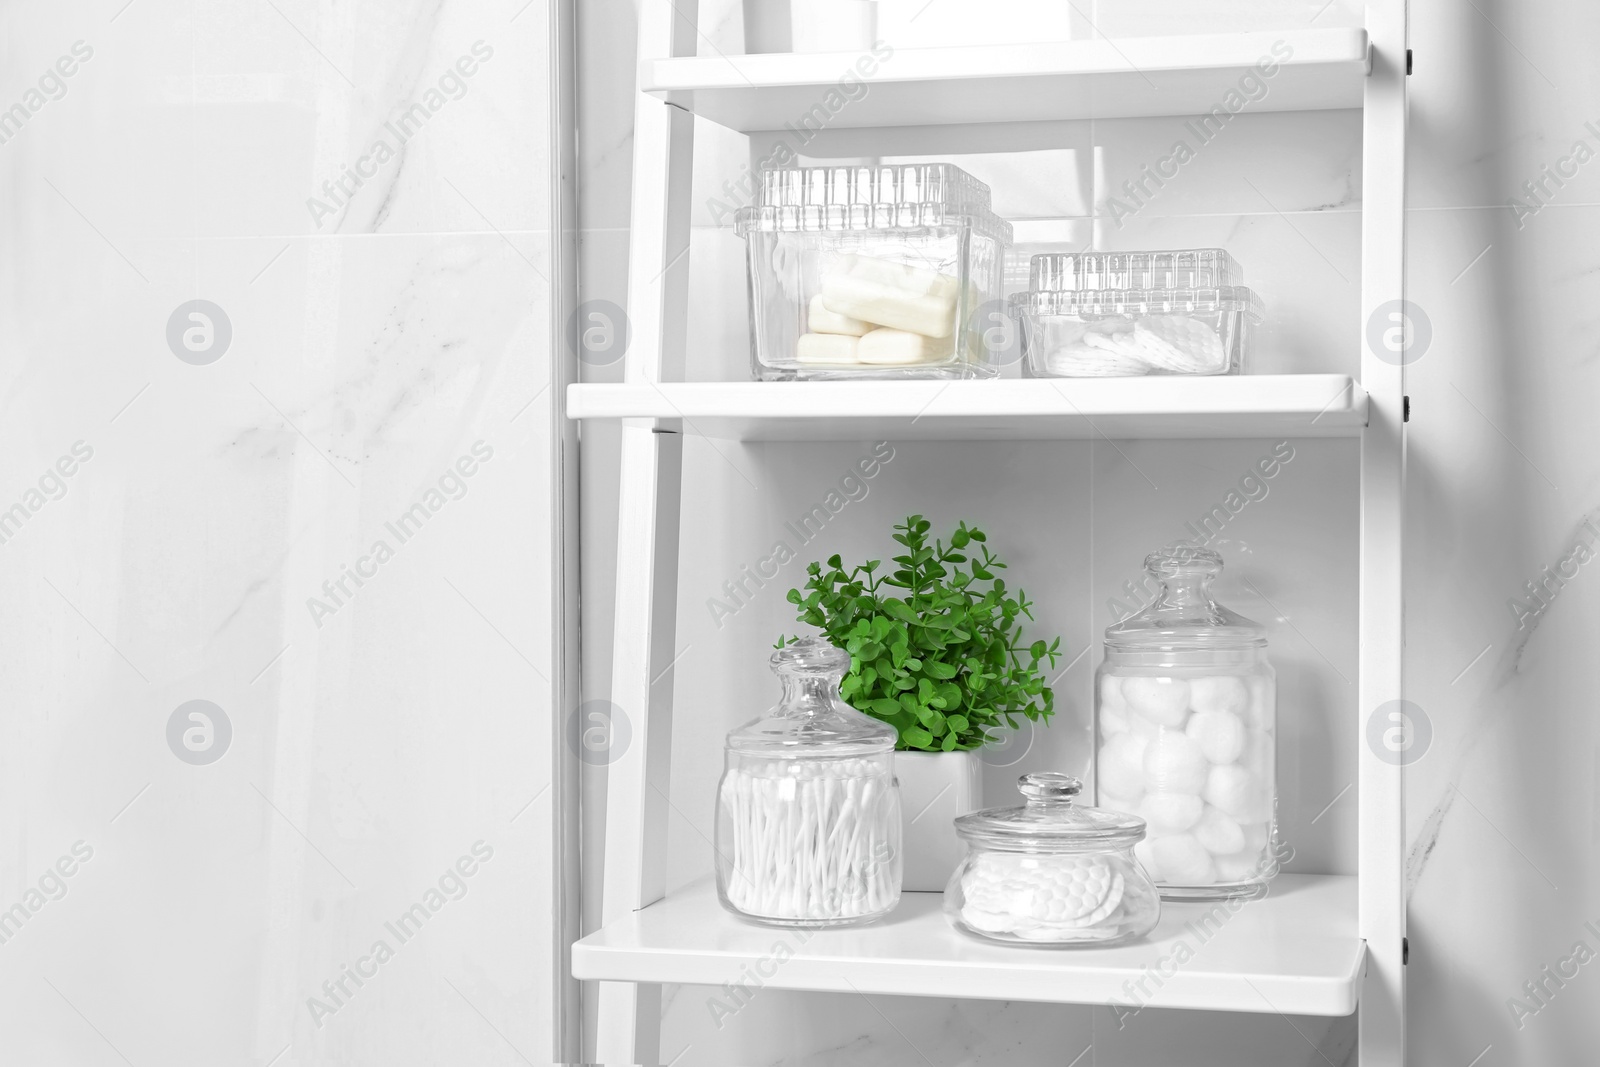 Photo of Cotton swabs and other hygiene products on shelving unit in bathroom